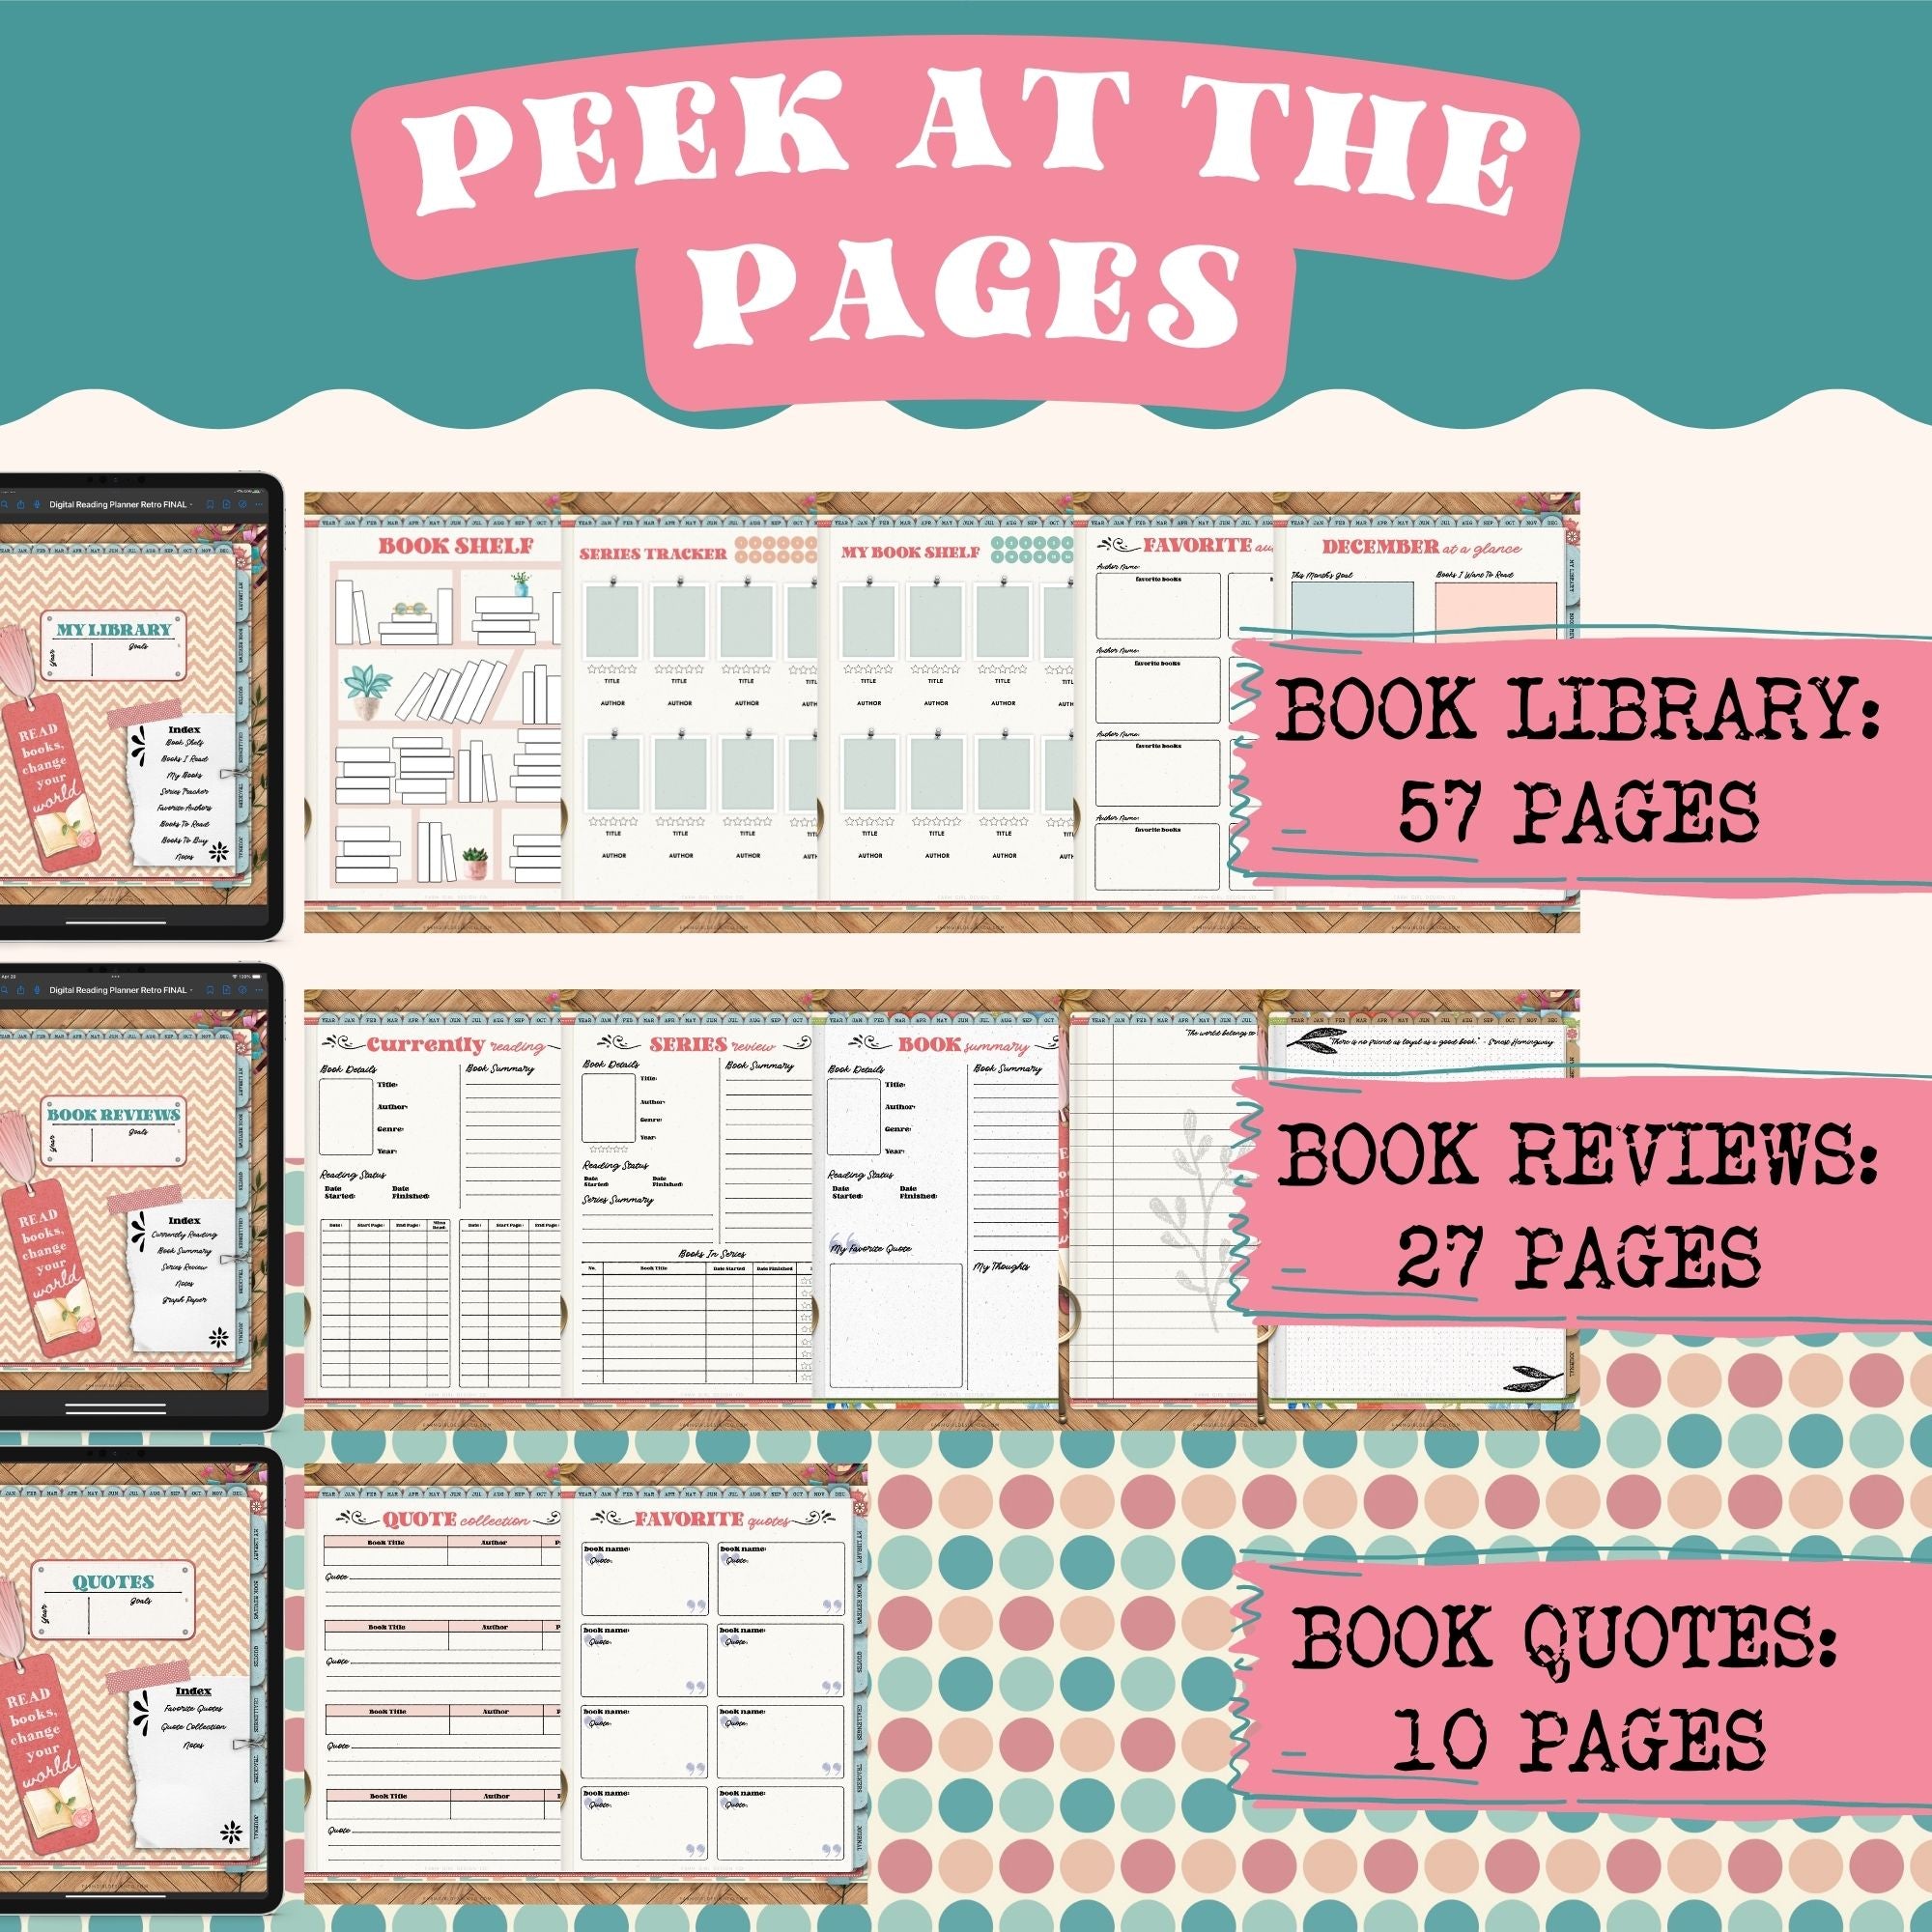 This cool retro-themed digital reading planner is a fun way to track reading progress, take notes, and write ideas and thoughts in the digital journal. This 680-page reading planner includes 19 hyperlinked sections including reading logs, book trackers, and more. 